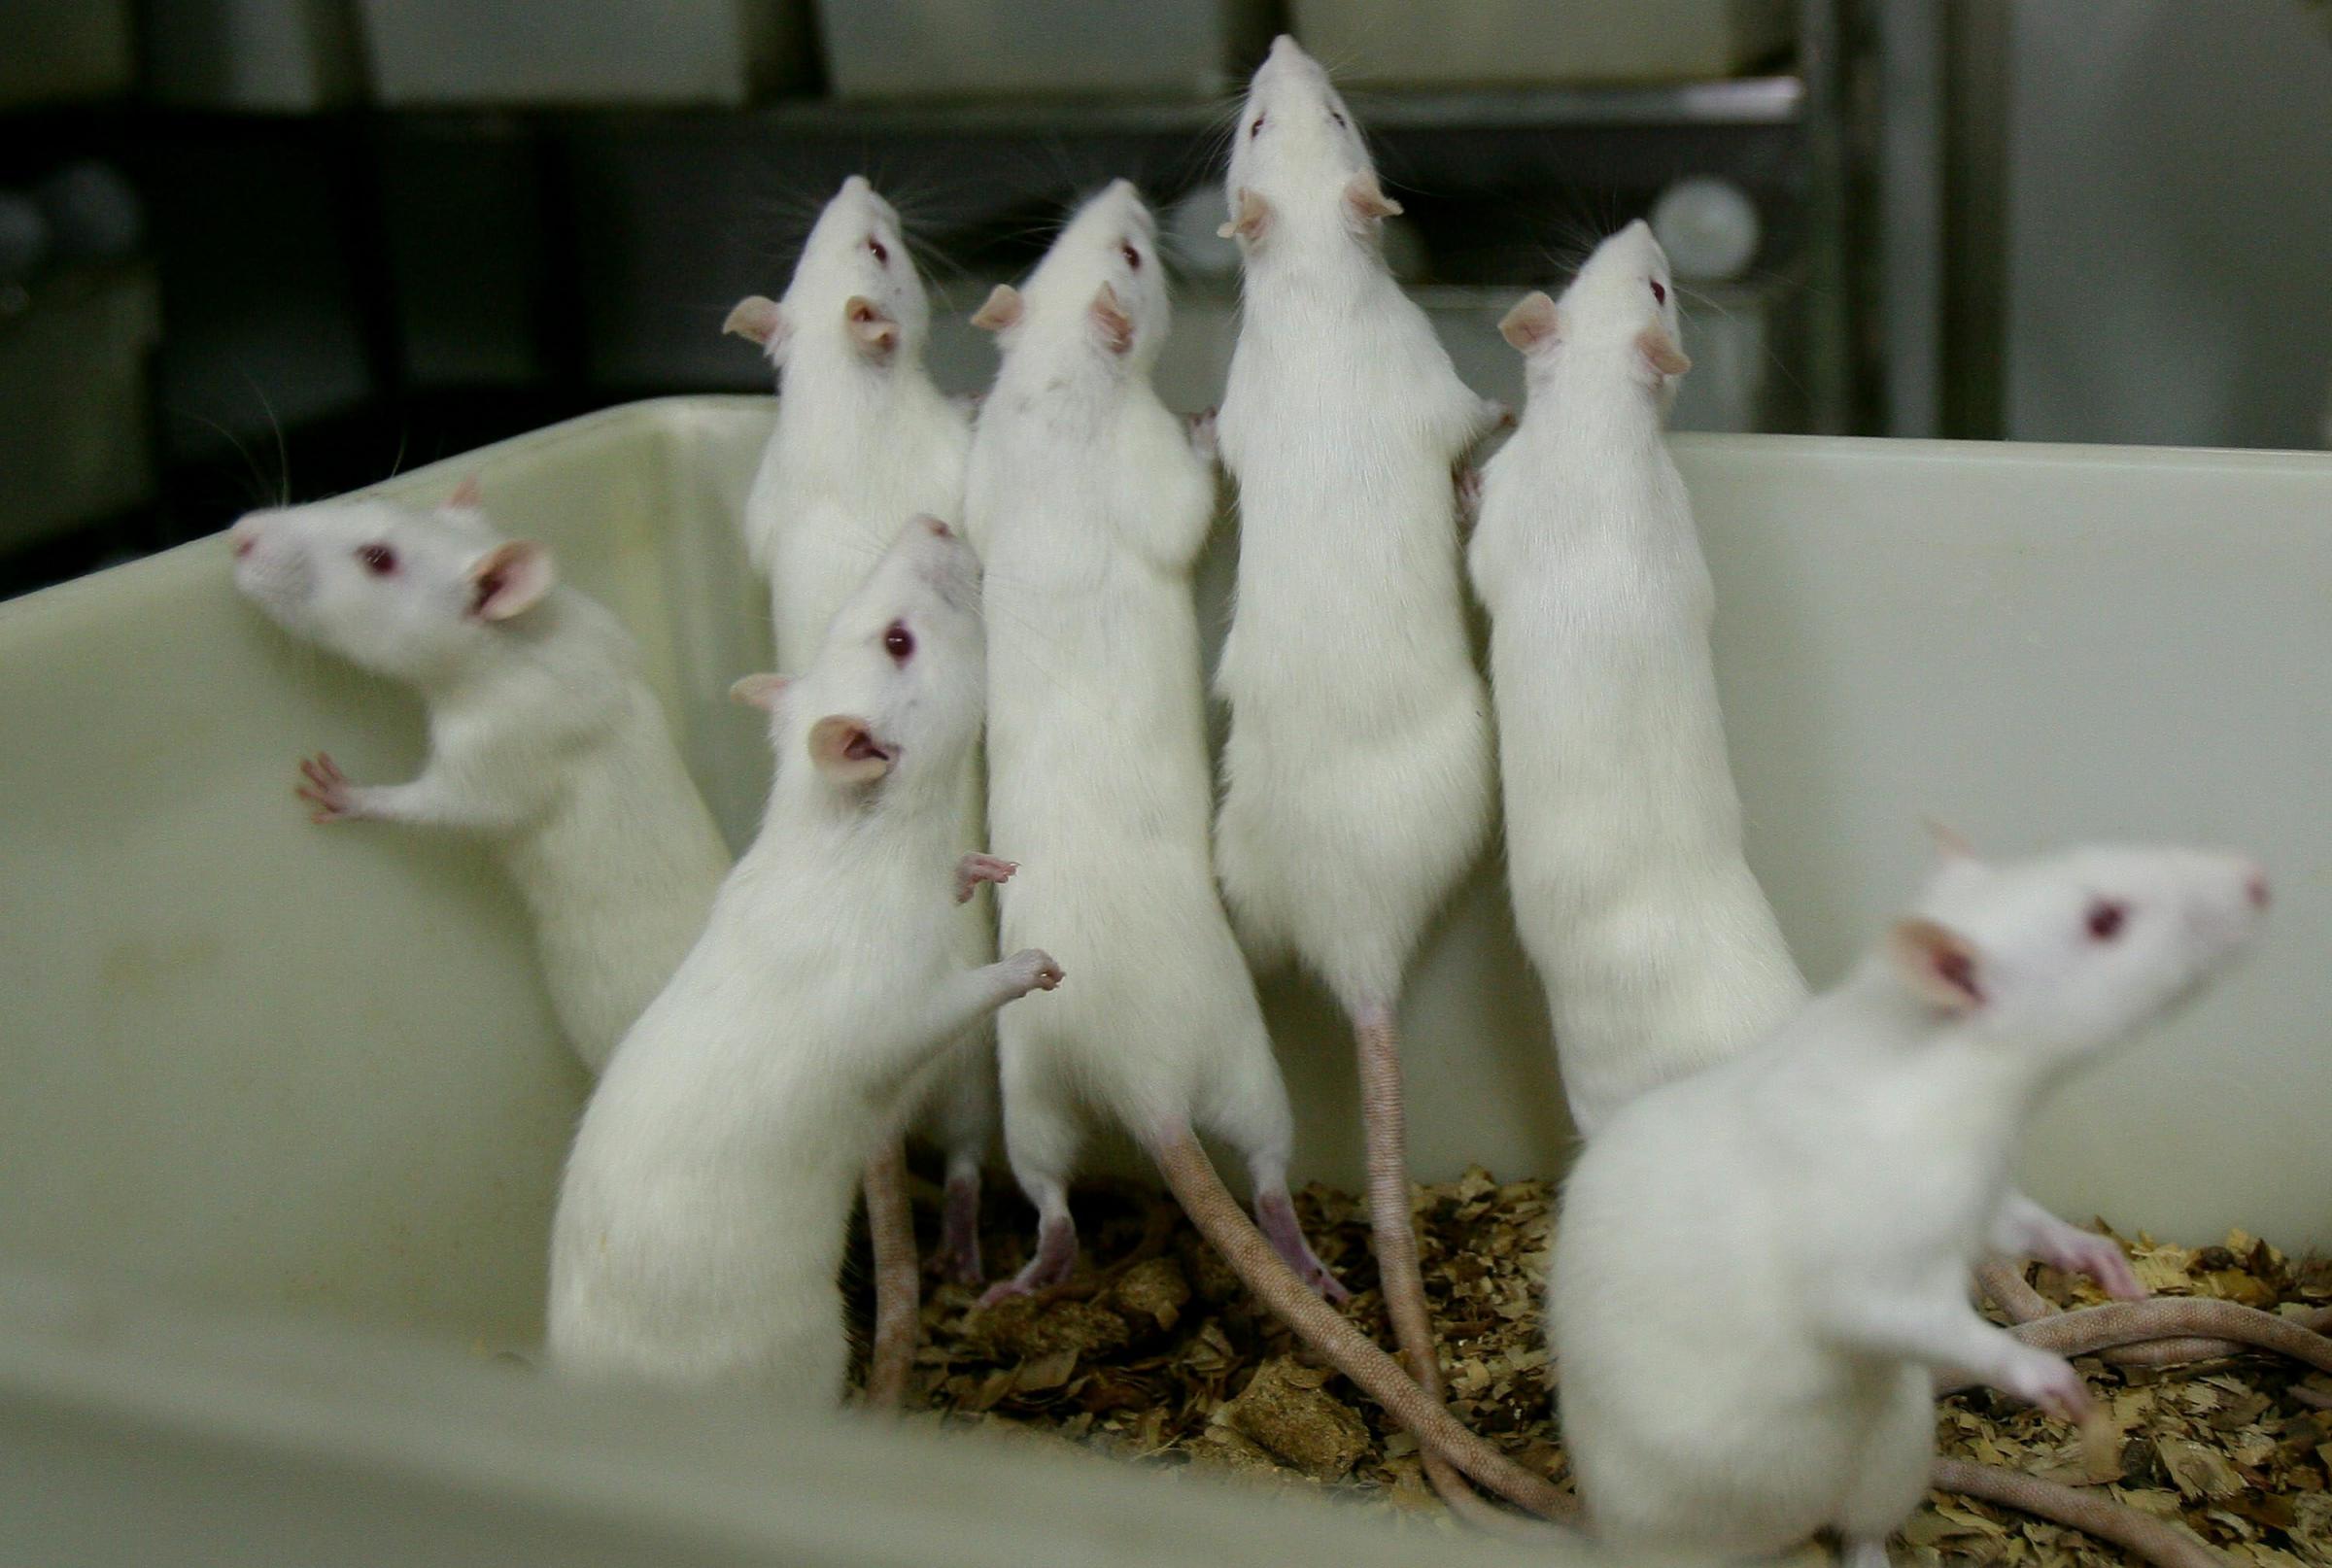 Should the use of laboratory animals be outlawed?